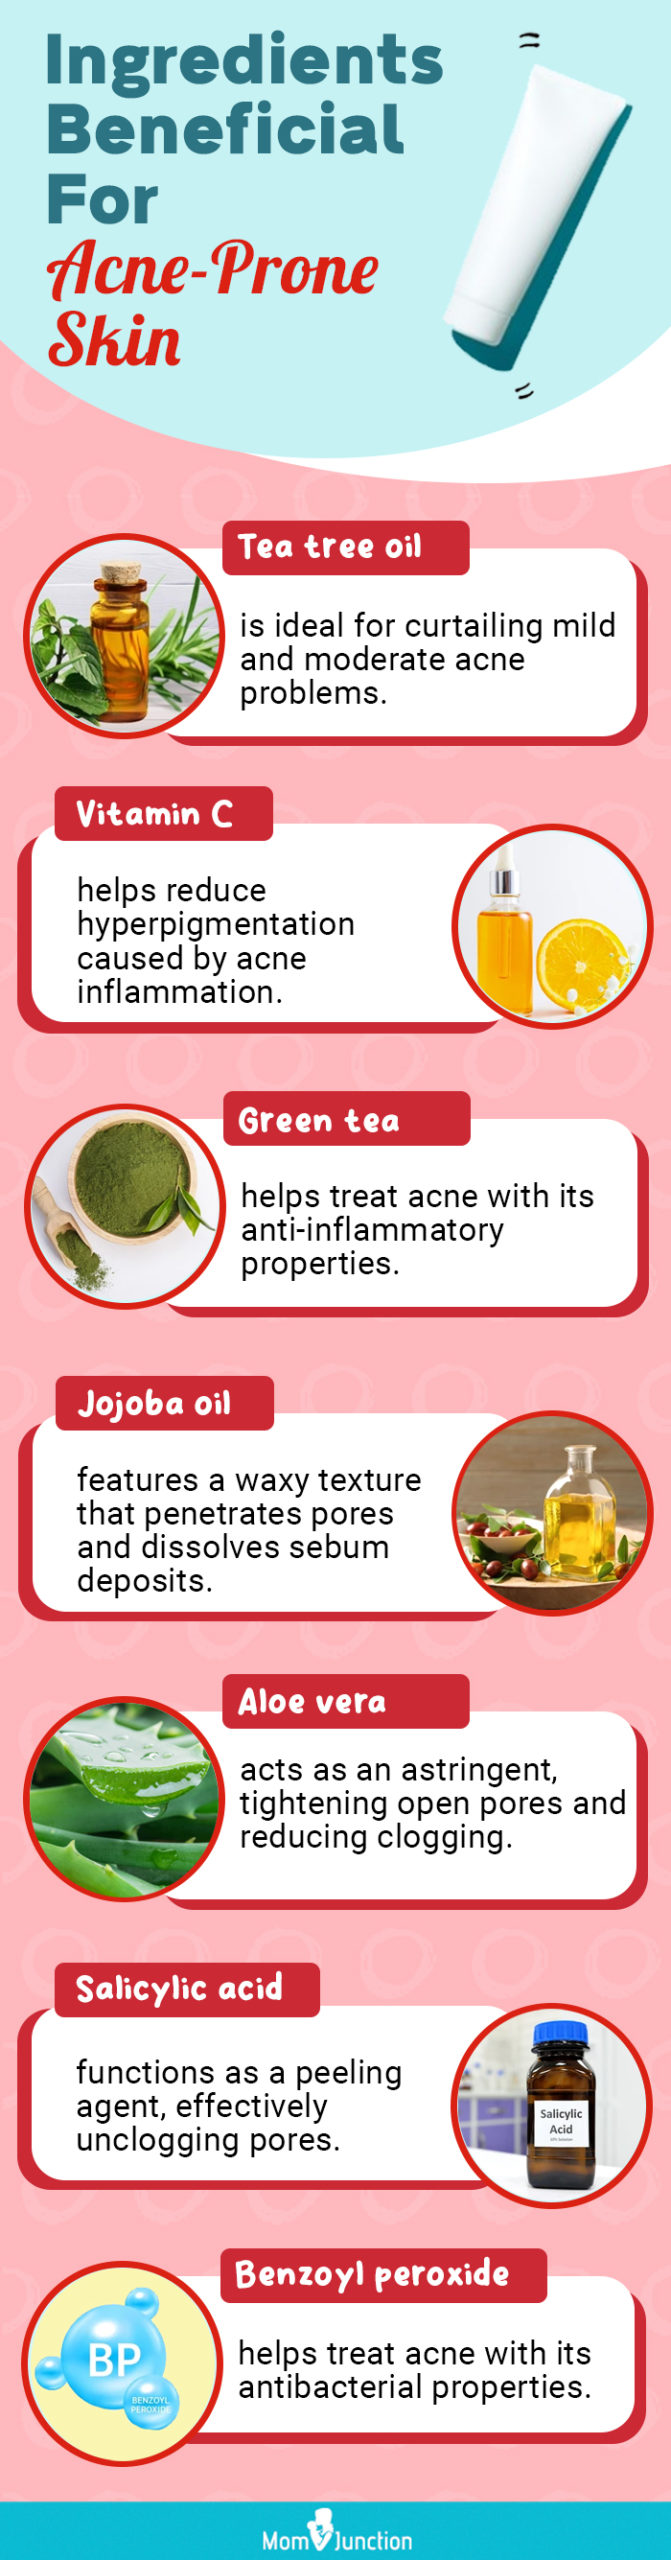 Ingredients Beneficial For Acne Prone Skin (infographic)